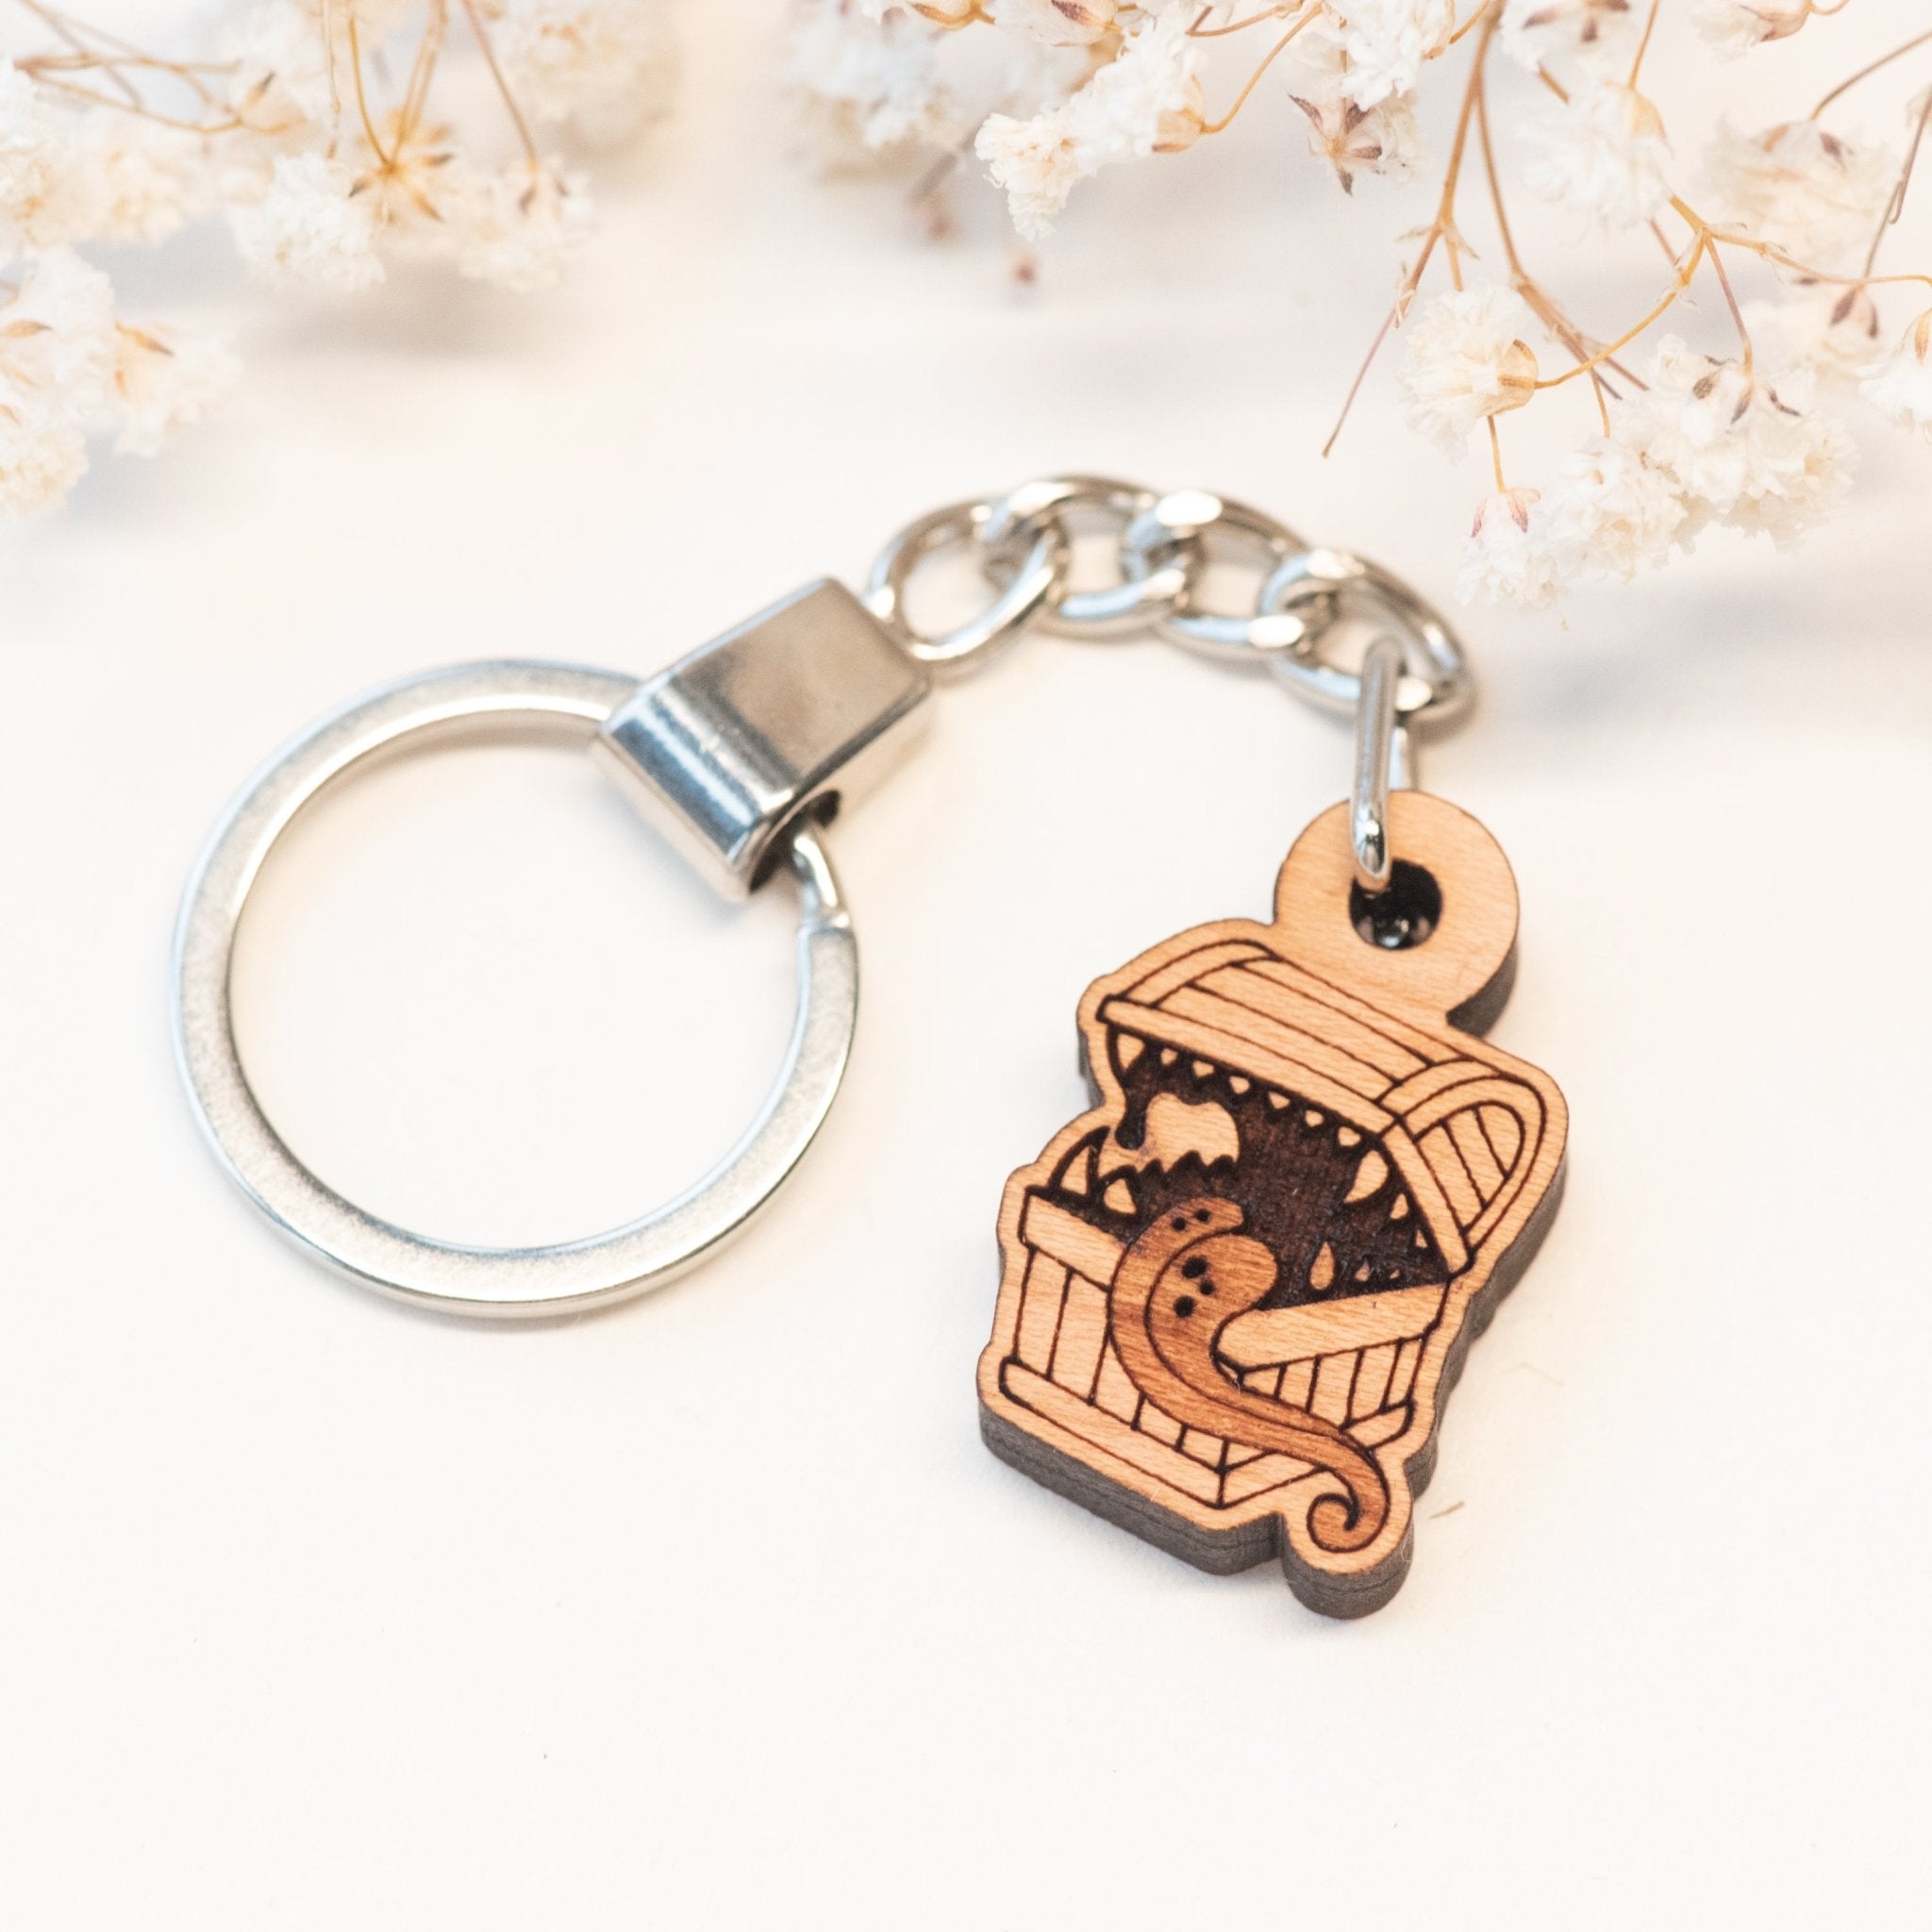 Mimic Treasure Chest Cherry Wood Keyring - KT25010 - Robin Valley Official Store